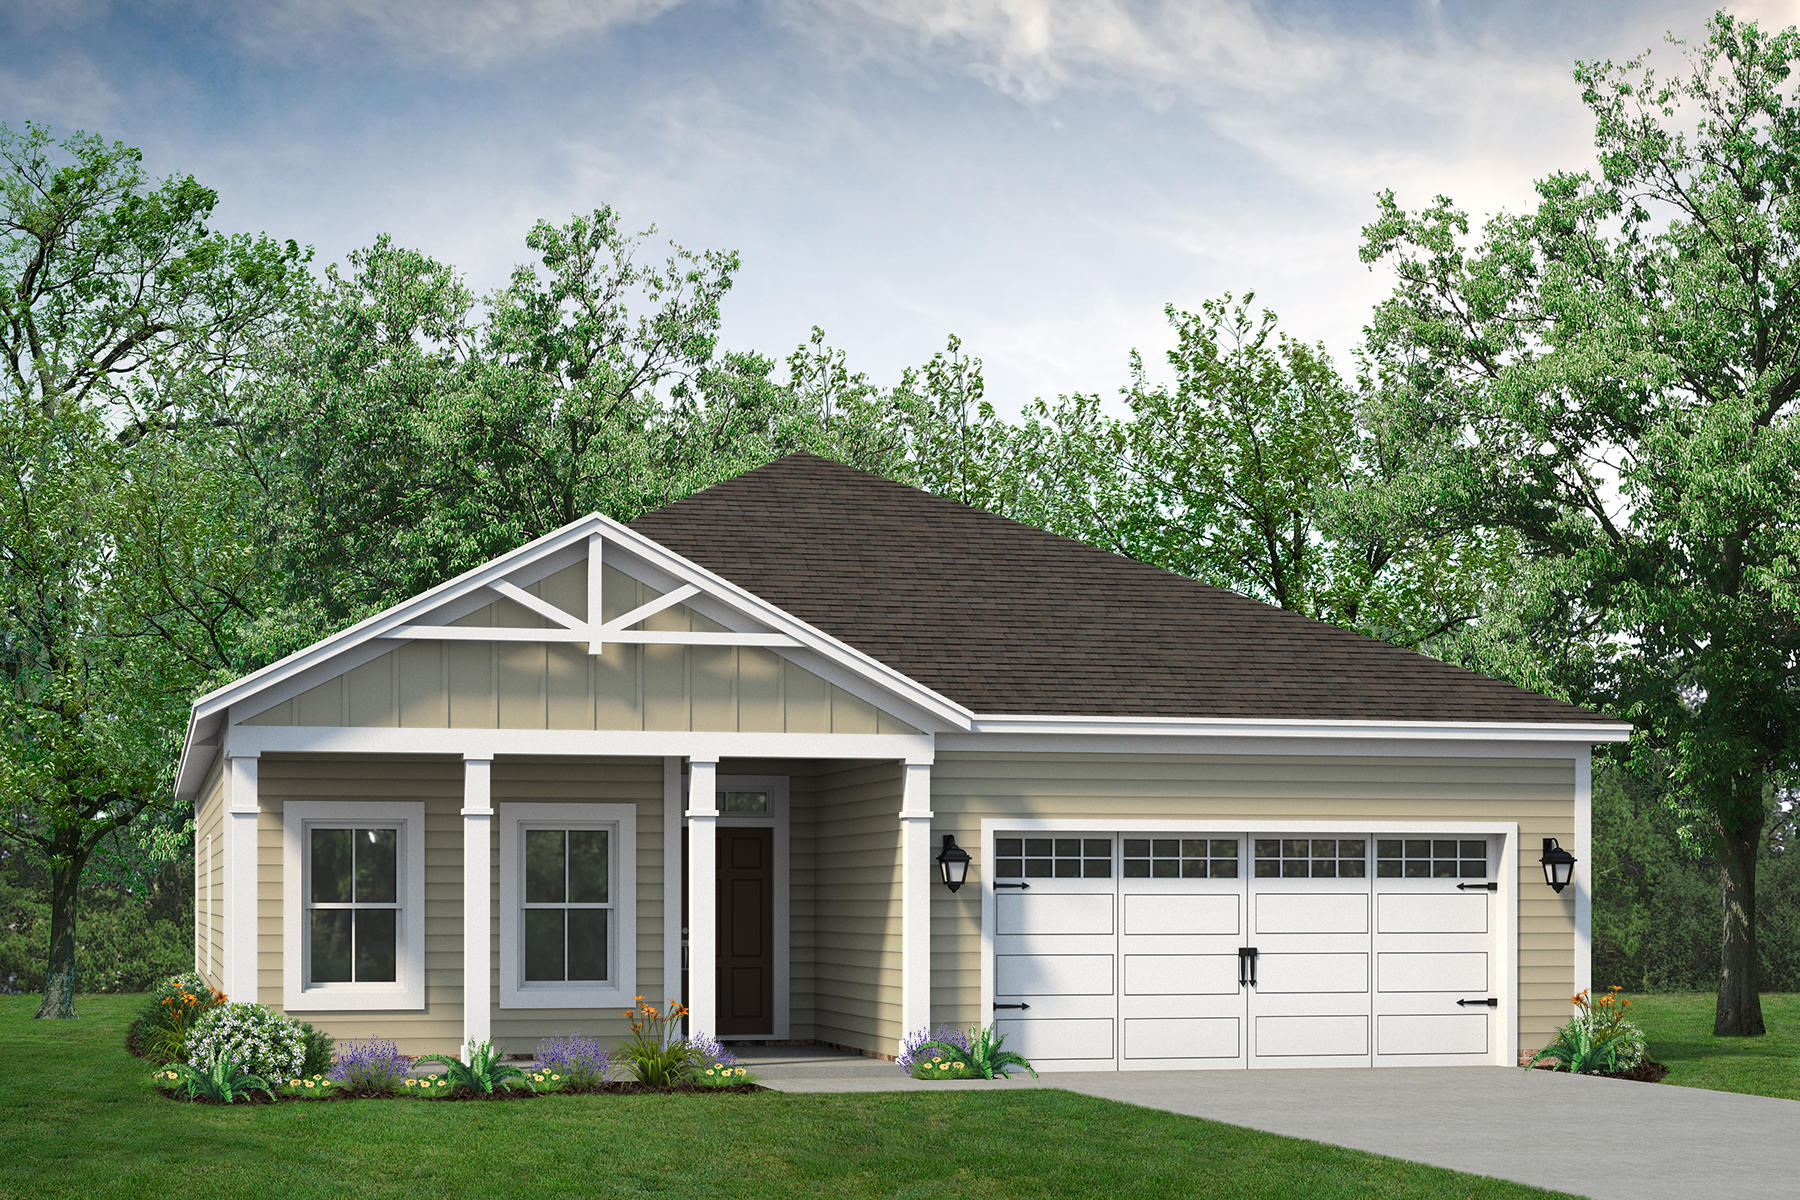 Elevation F. The Redbud New Home in Lillington, NC